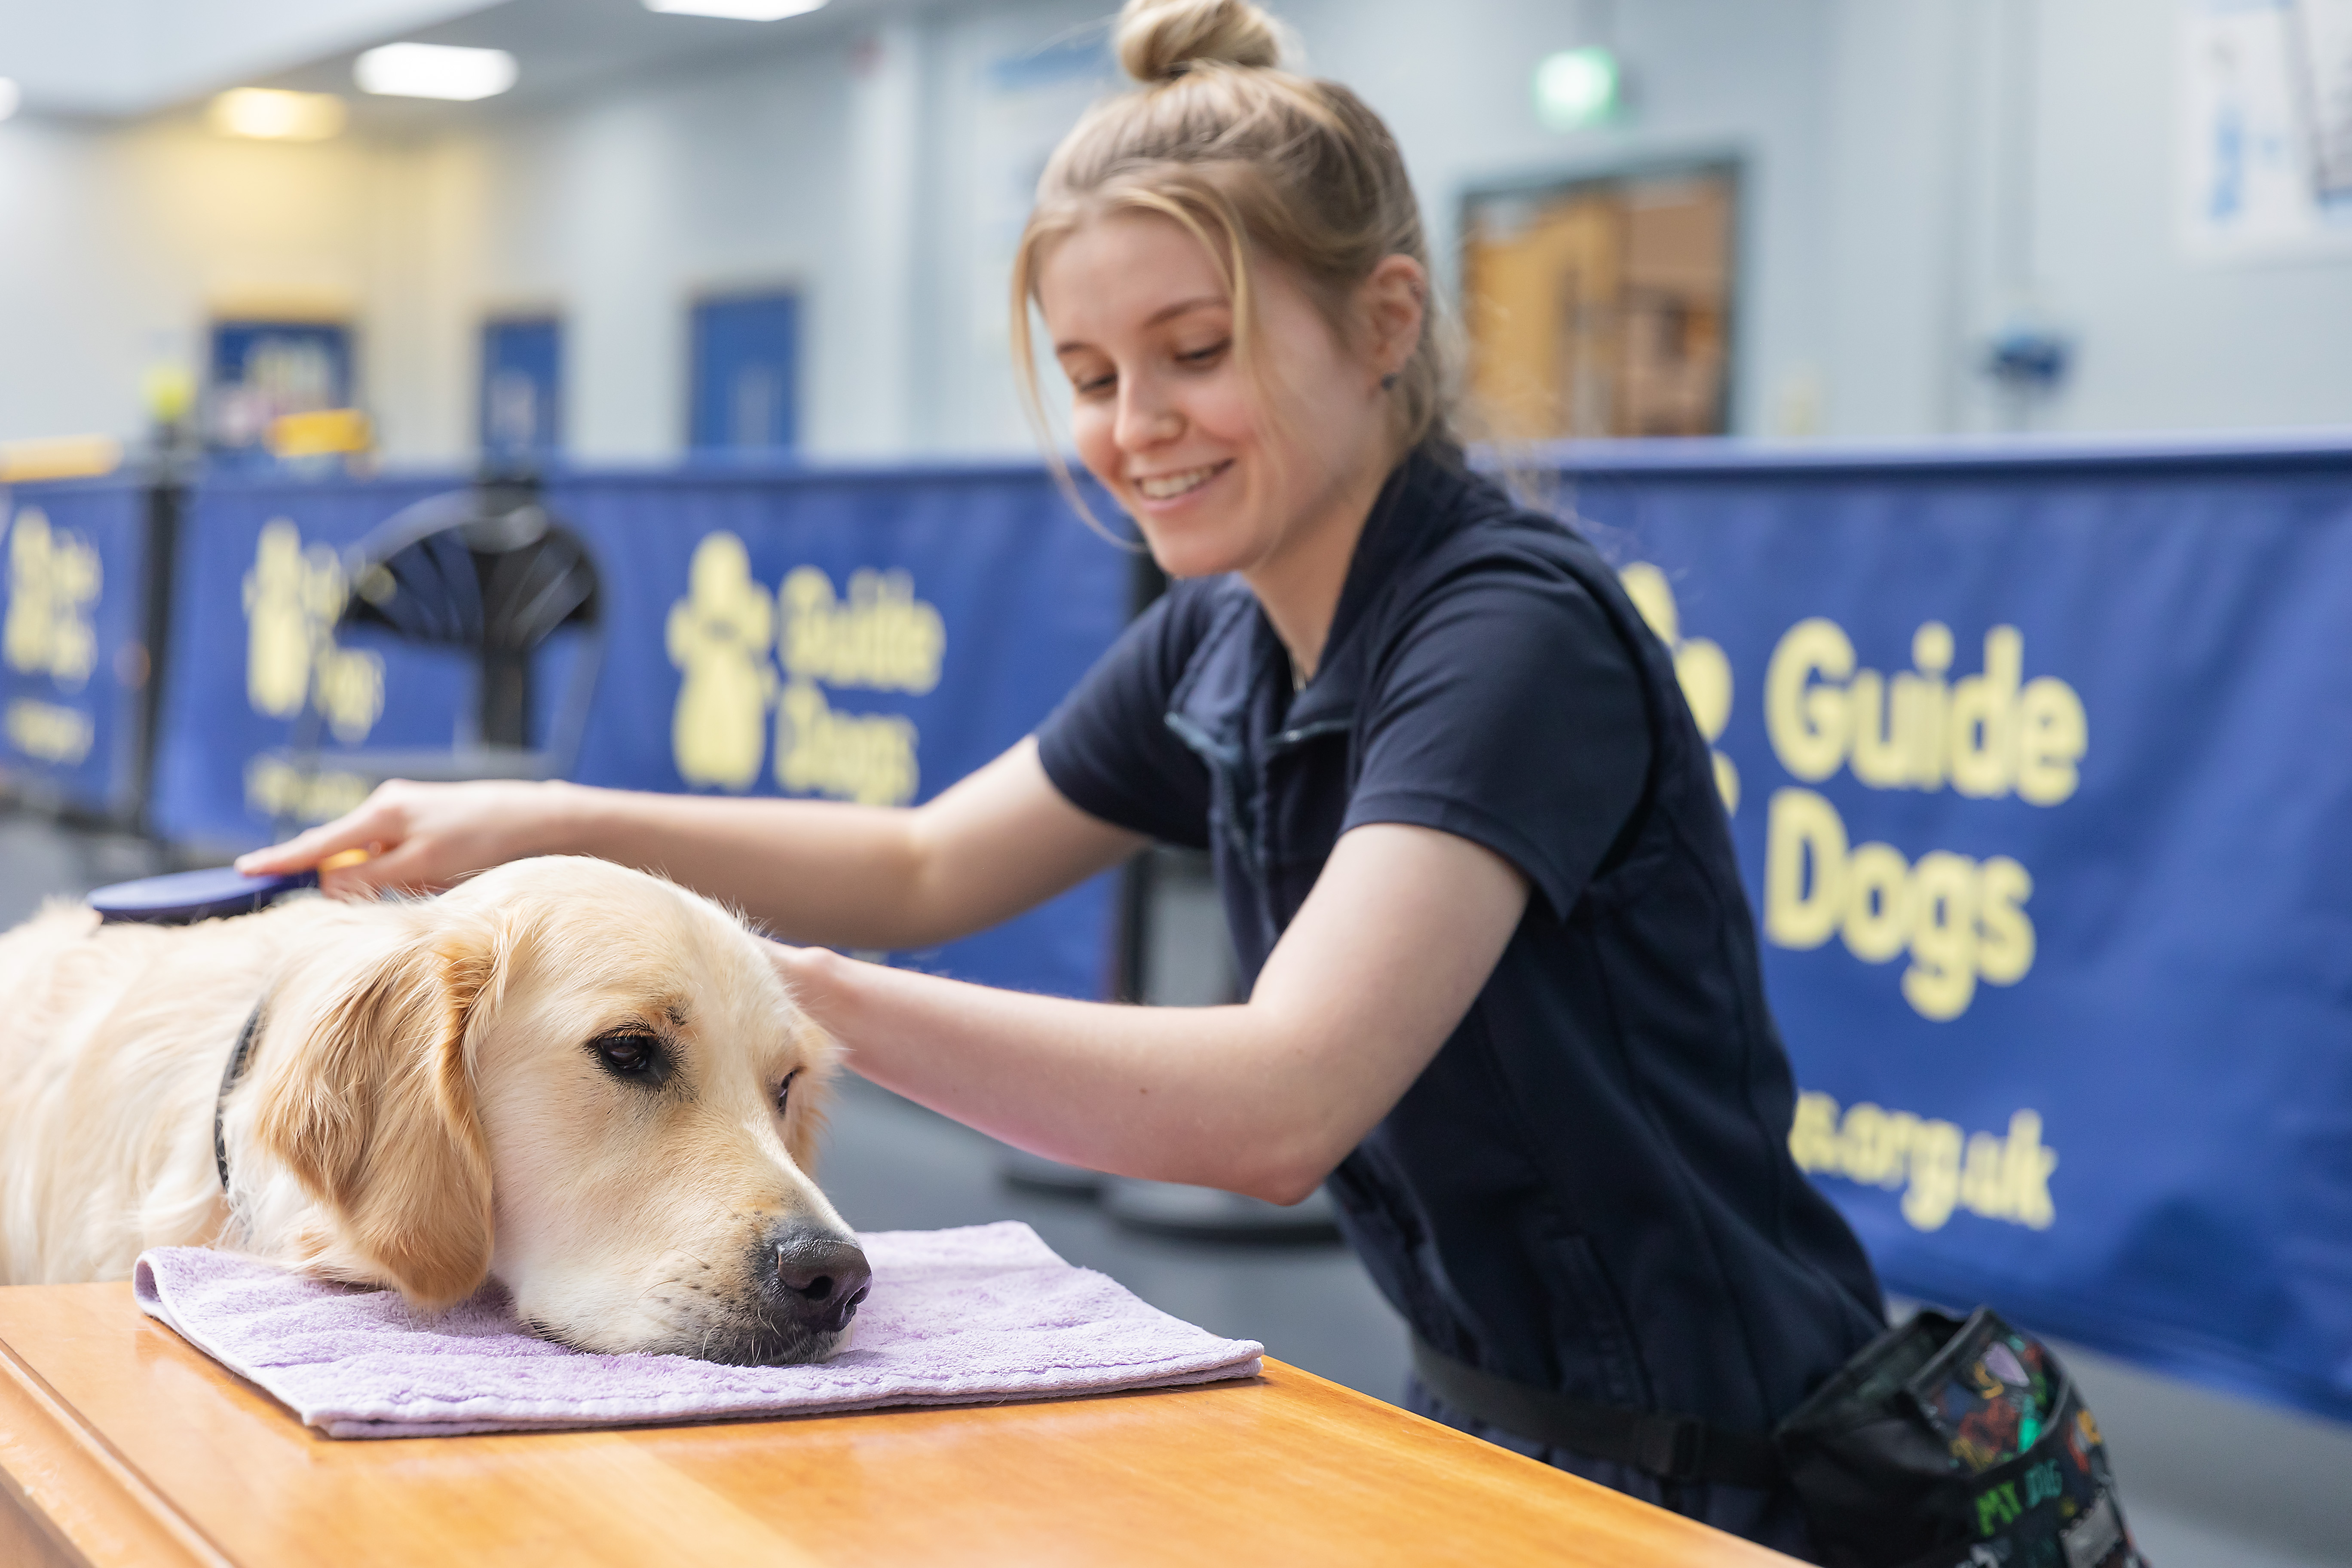 Guide dog being groomed with its head resting on a table.